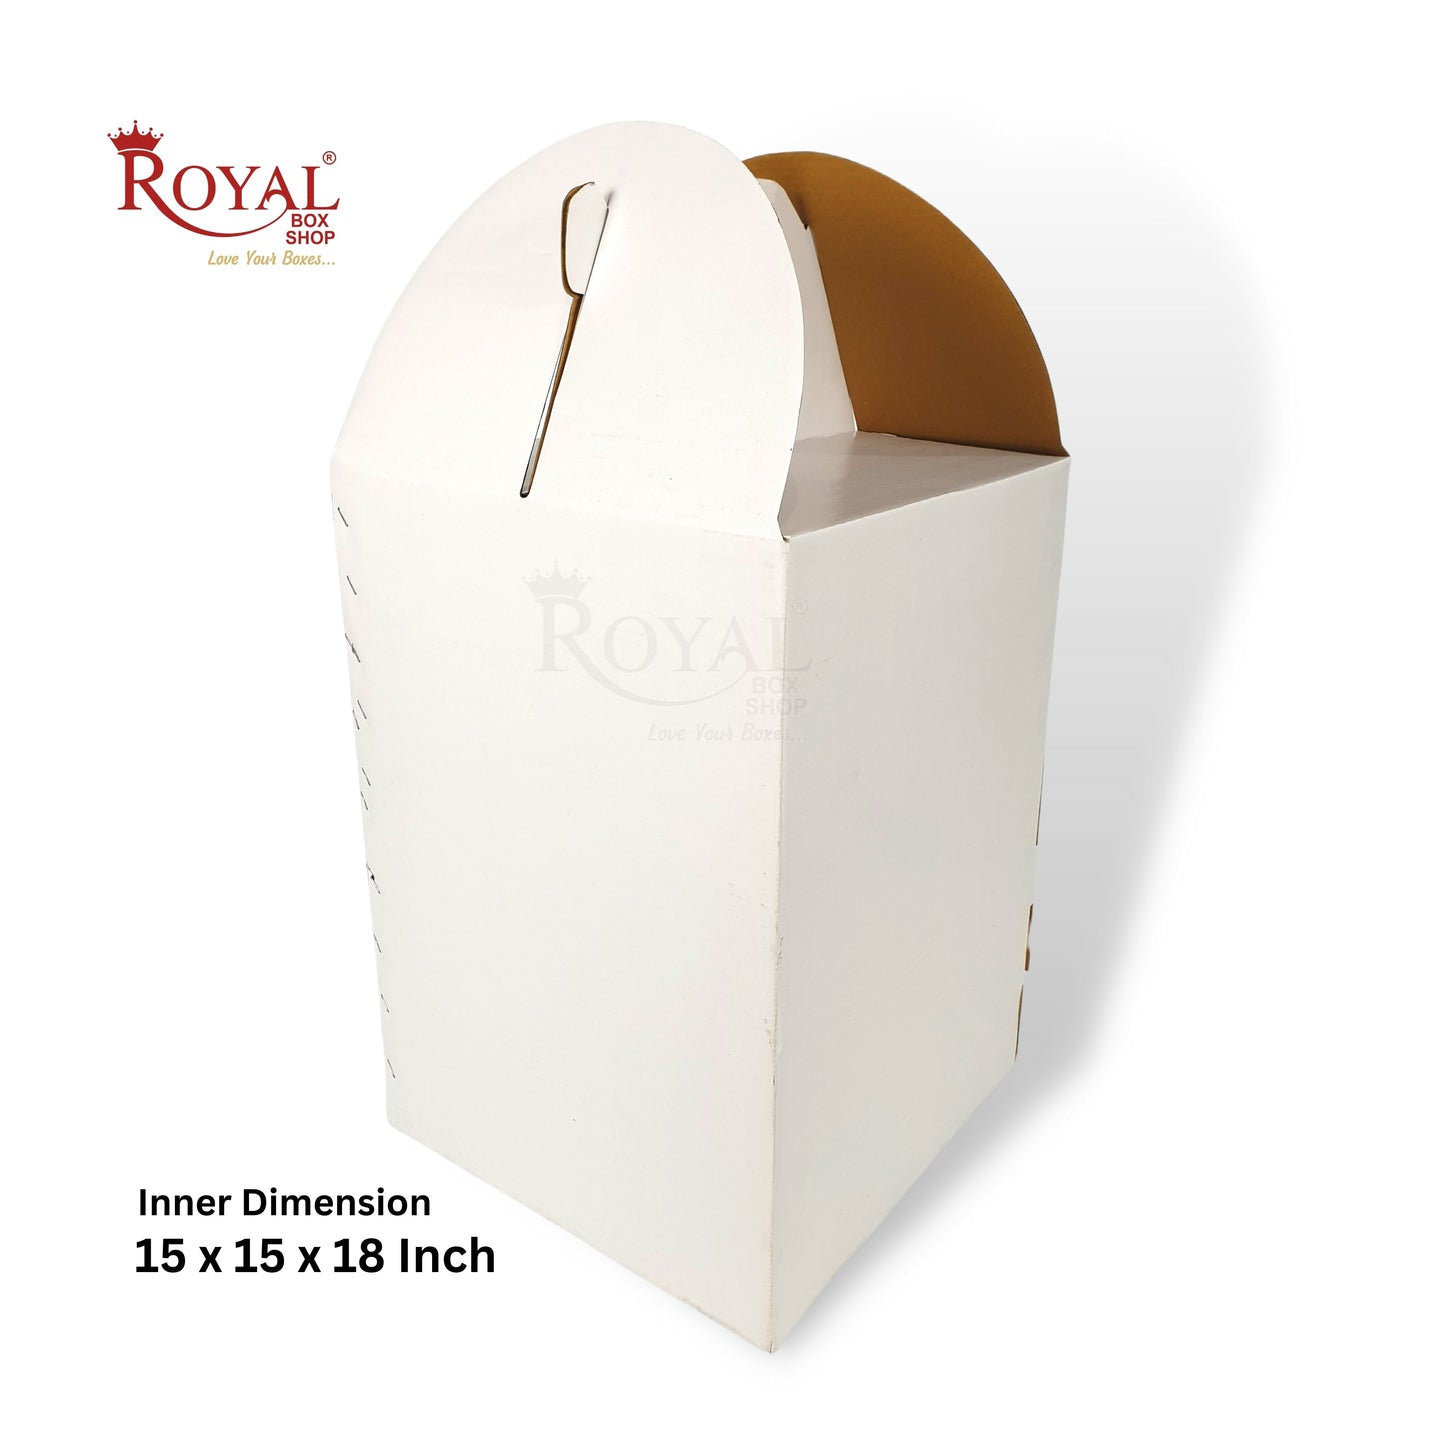 Corrugated Tall Cake Box with Handle I Exquisite White I 15x15x18 Inch I Perfect for Birthdays Cake Packaging Royal Box Shop